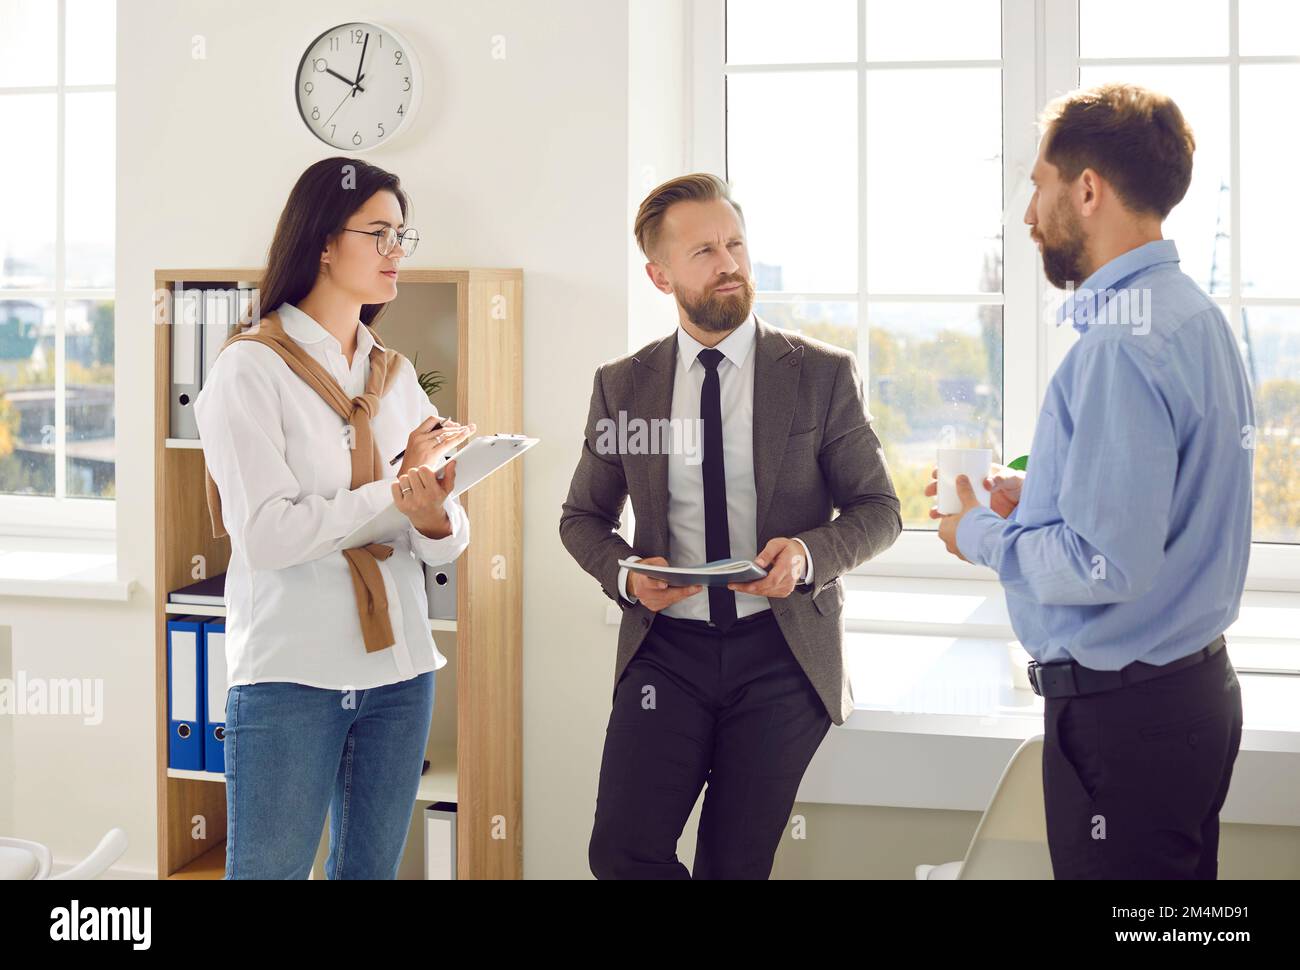 Two businessmen and female trainee or secretary are discussing work tasks together in office. Stock Photo